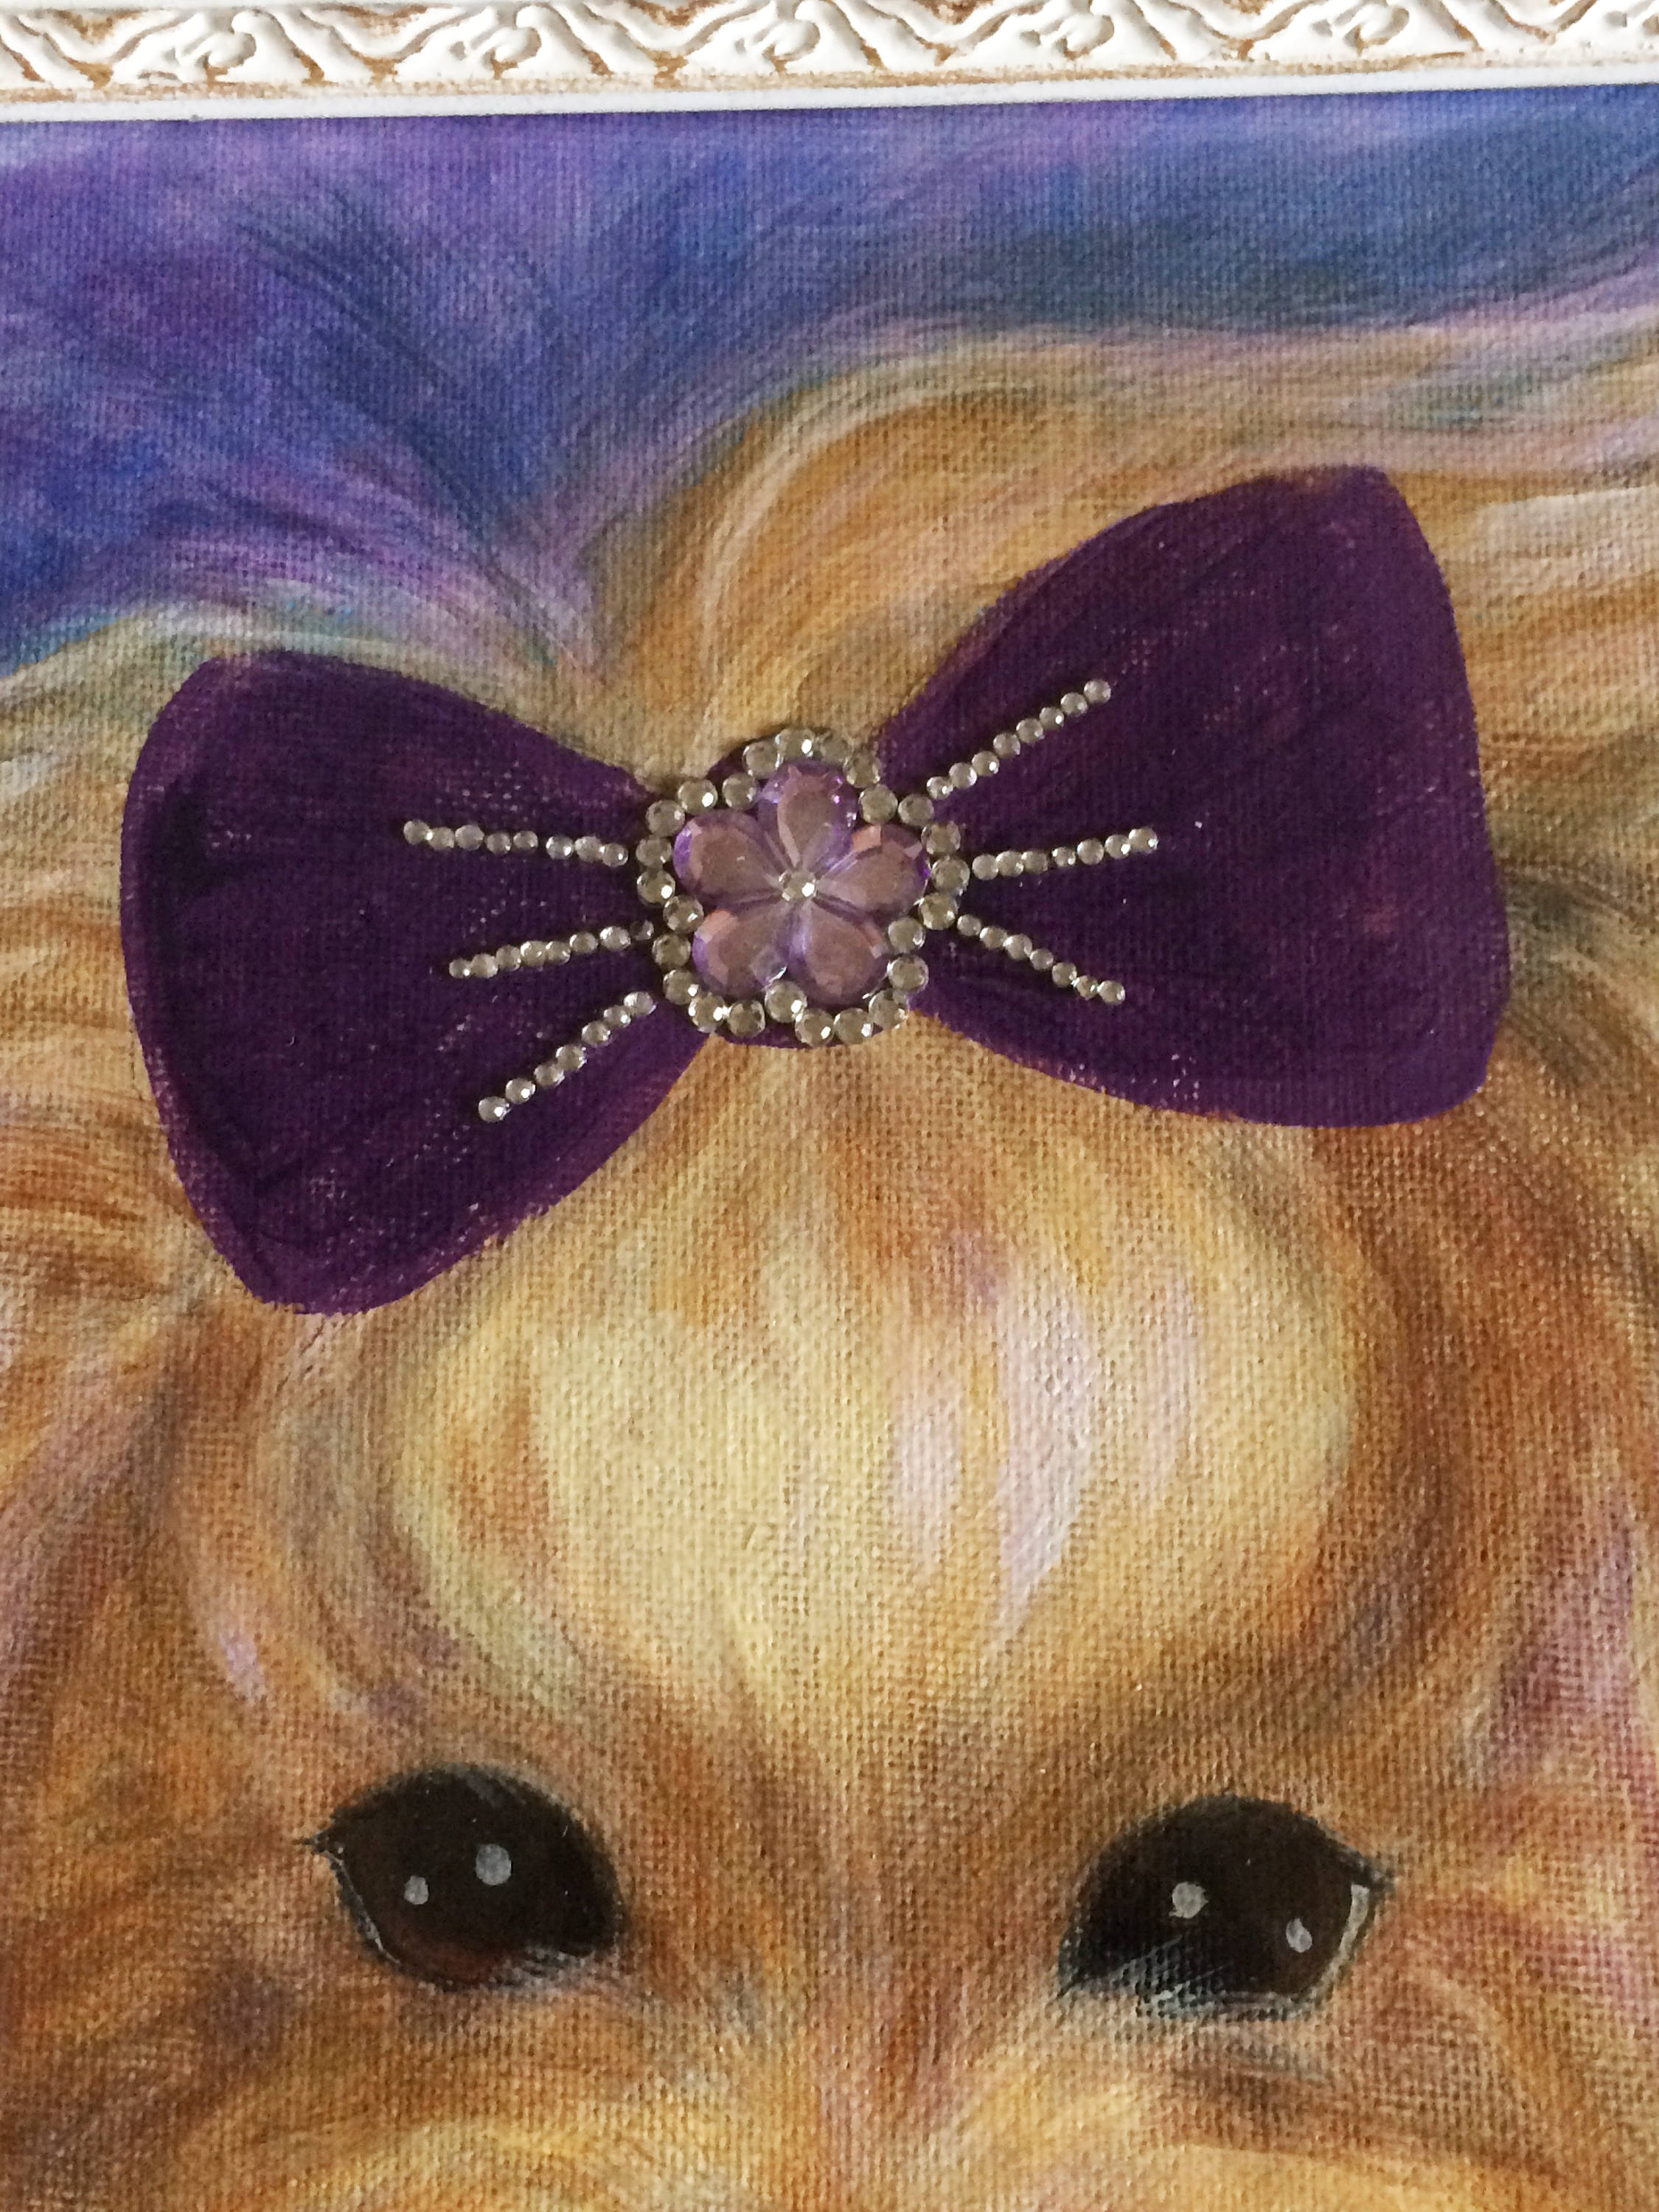 11"x 14" Framed Yorkshire Terrier Portrait with Rhinestone Accents- Yorkie Painting-Acrylic Yorkie Painting on Canvas